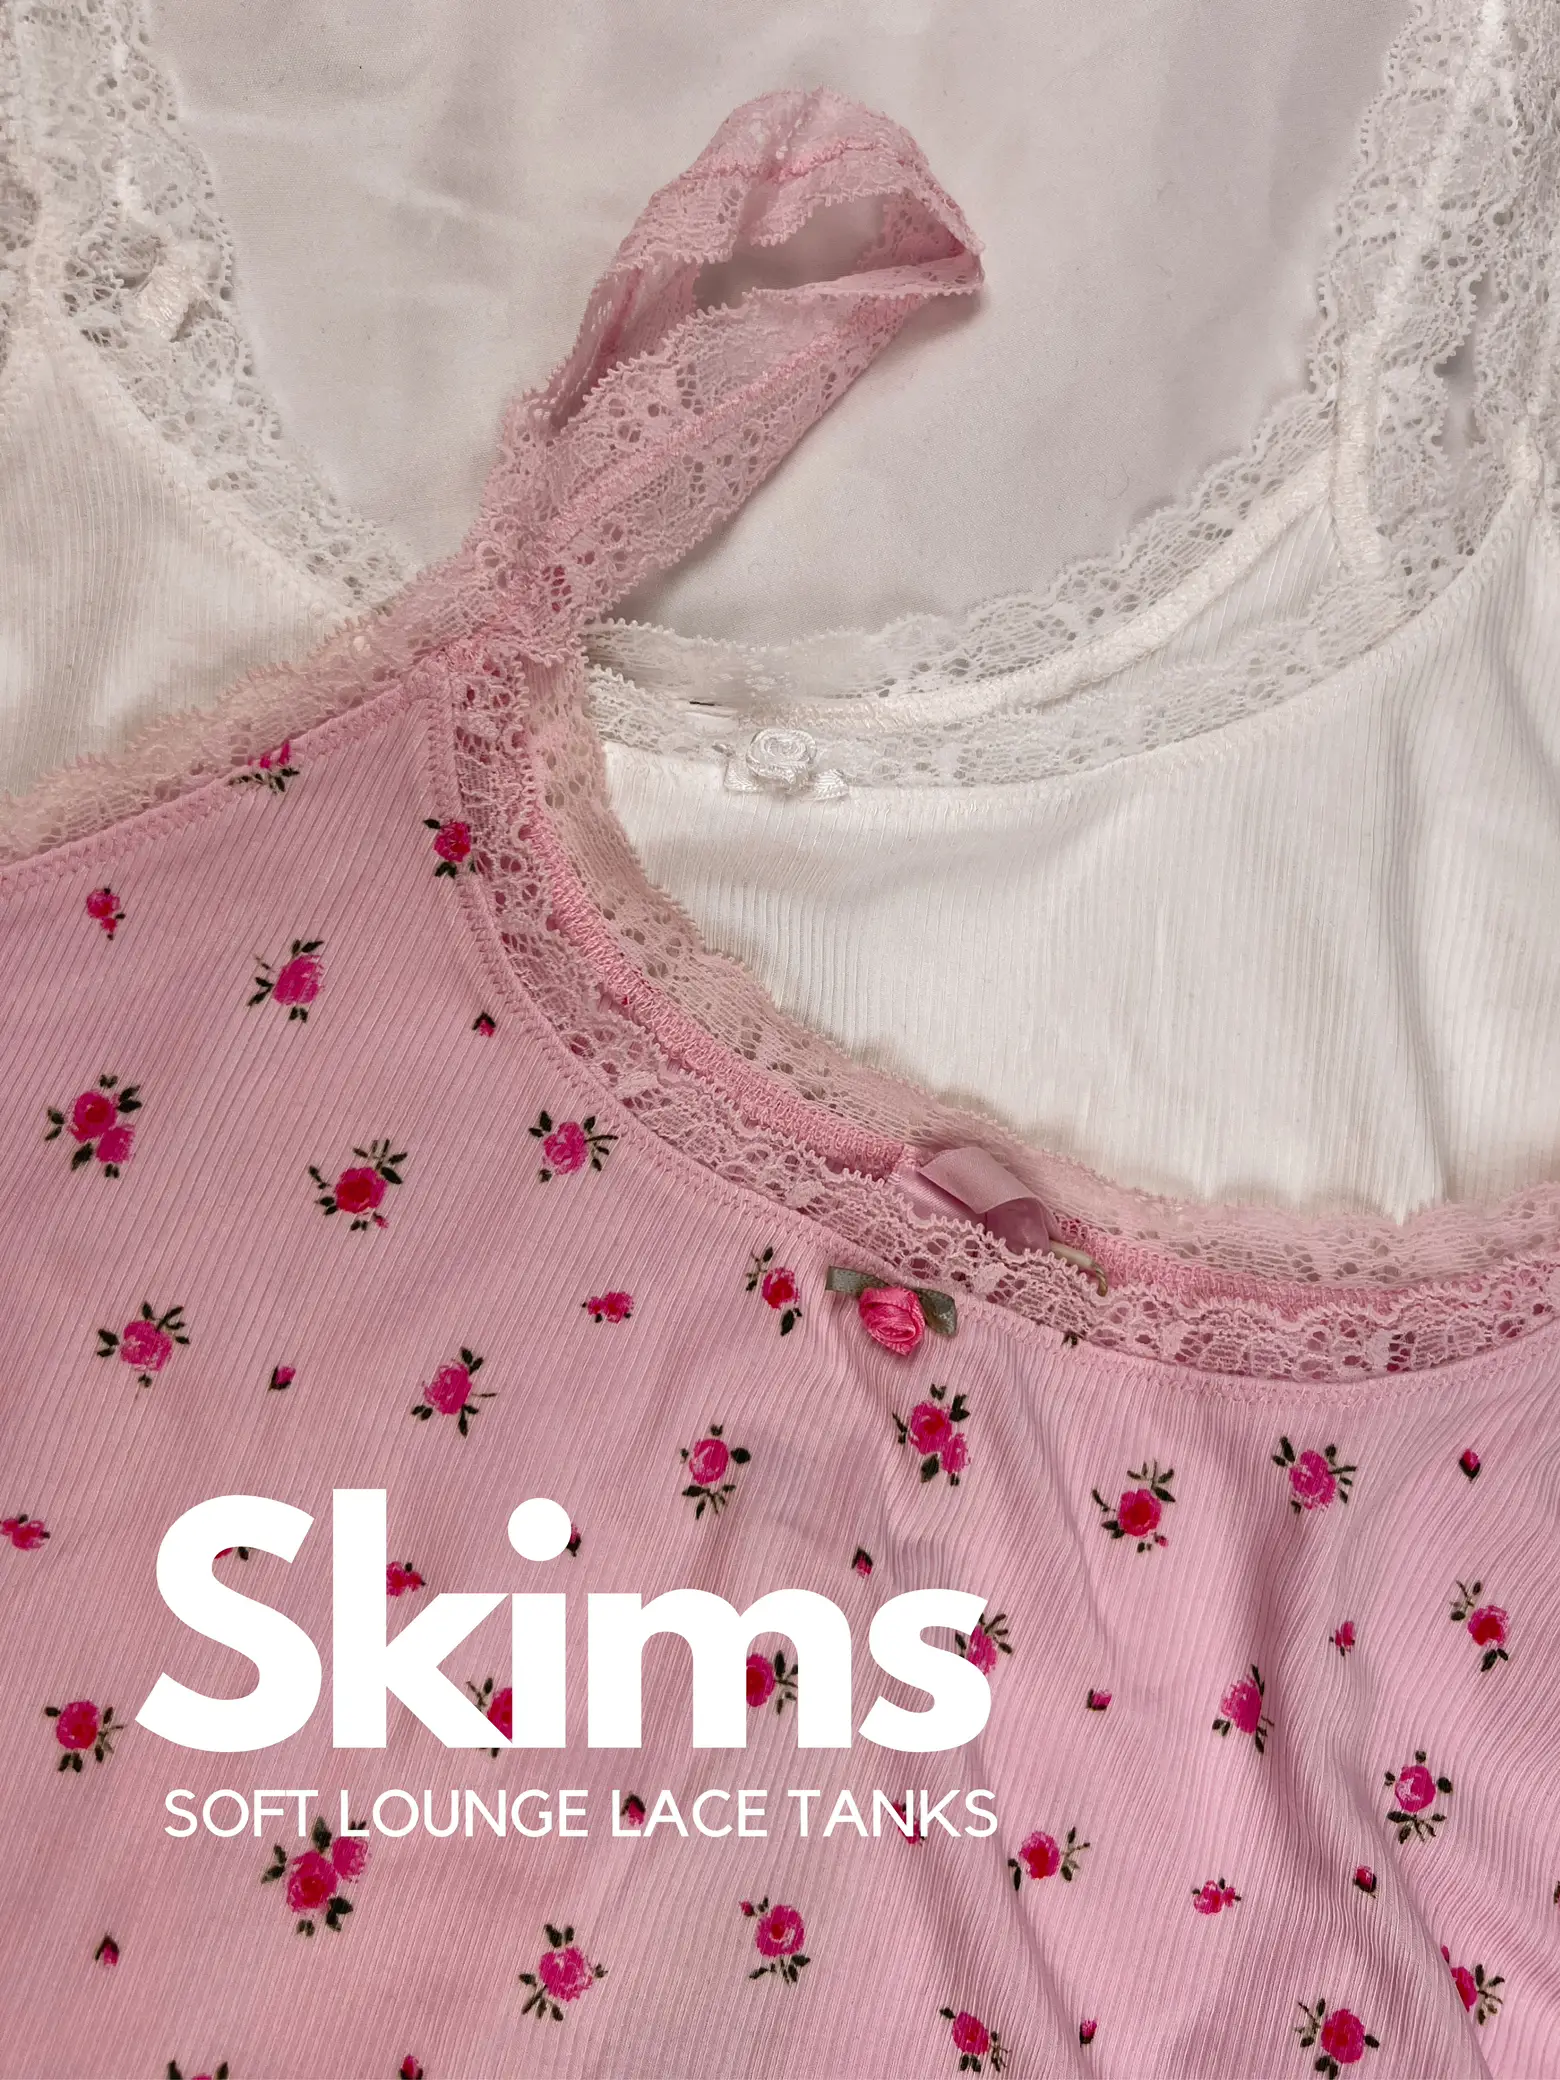 Skims Lace Tanks, Gallery posted by emmafearsmayo